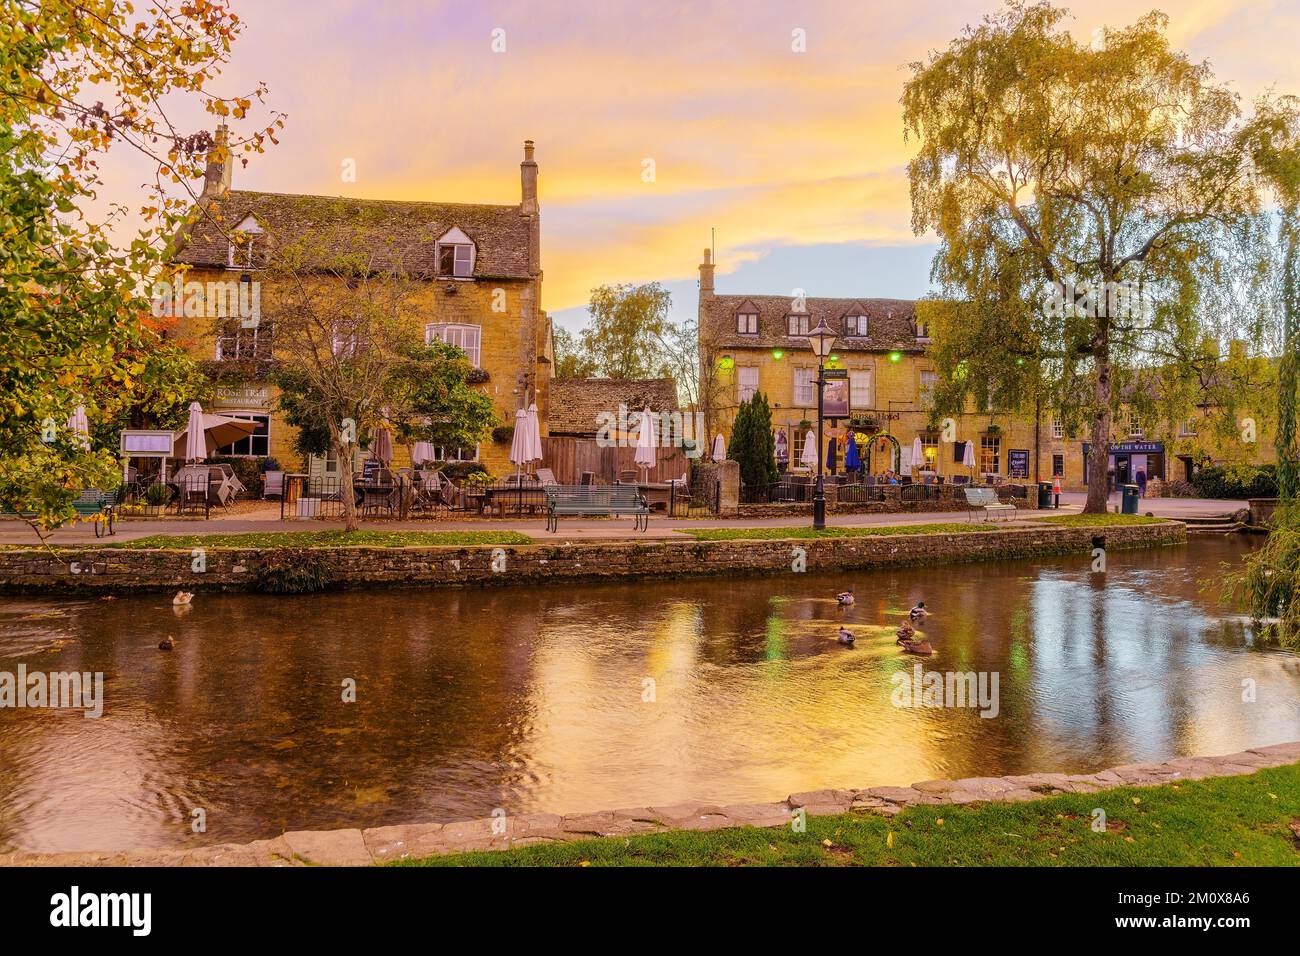 Bourton-on-the-Water, UK - October 17, 2022: Sunset scene of typical houses, the river Windrush, locals and visitors, in the village Bourton-on-the-Wa Stock Photo